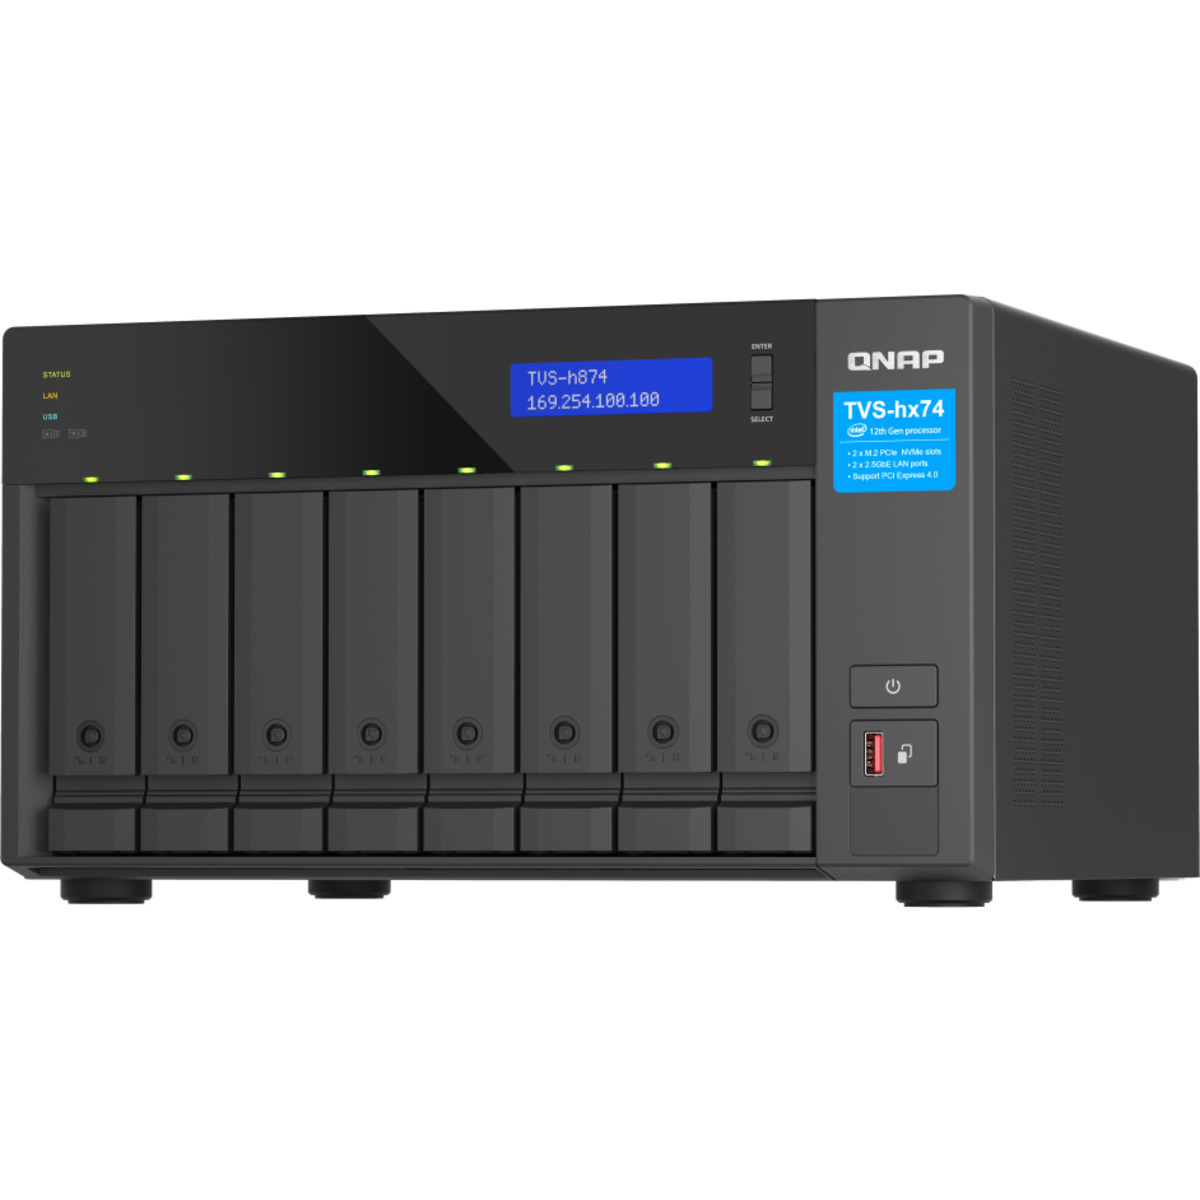 buy QNAP TVS-h874 Core i7 8tb Desktop NAS - Network Attached Storage Device 8x1000gb Samsung 870 EVO MZ-77E1T0BAM 2.5 560/530MB/s SATA 6Gb/s SSD CONSUMER Class Drives Installed - Burn-In Tested - nas headquarters buy network attached storage server device das new raid-5 free shipping usa spring sale TVS-h874 Core i7